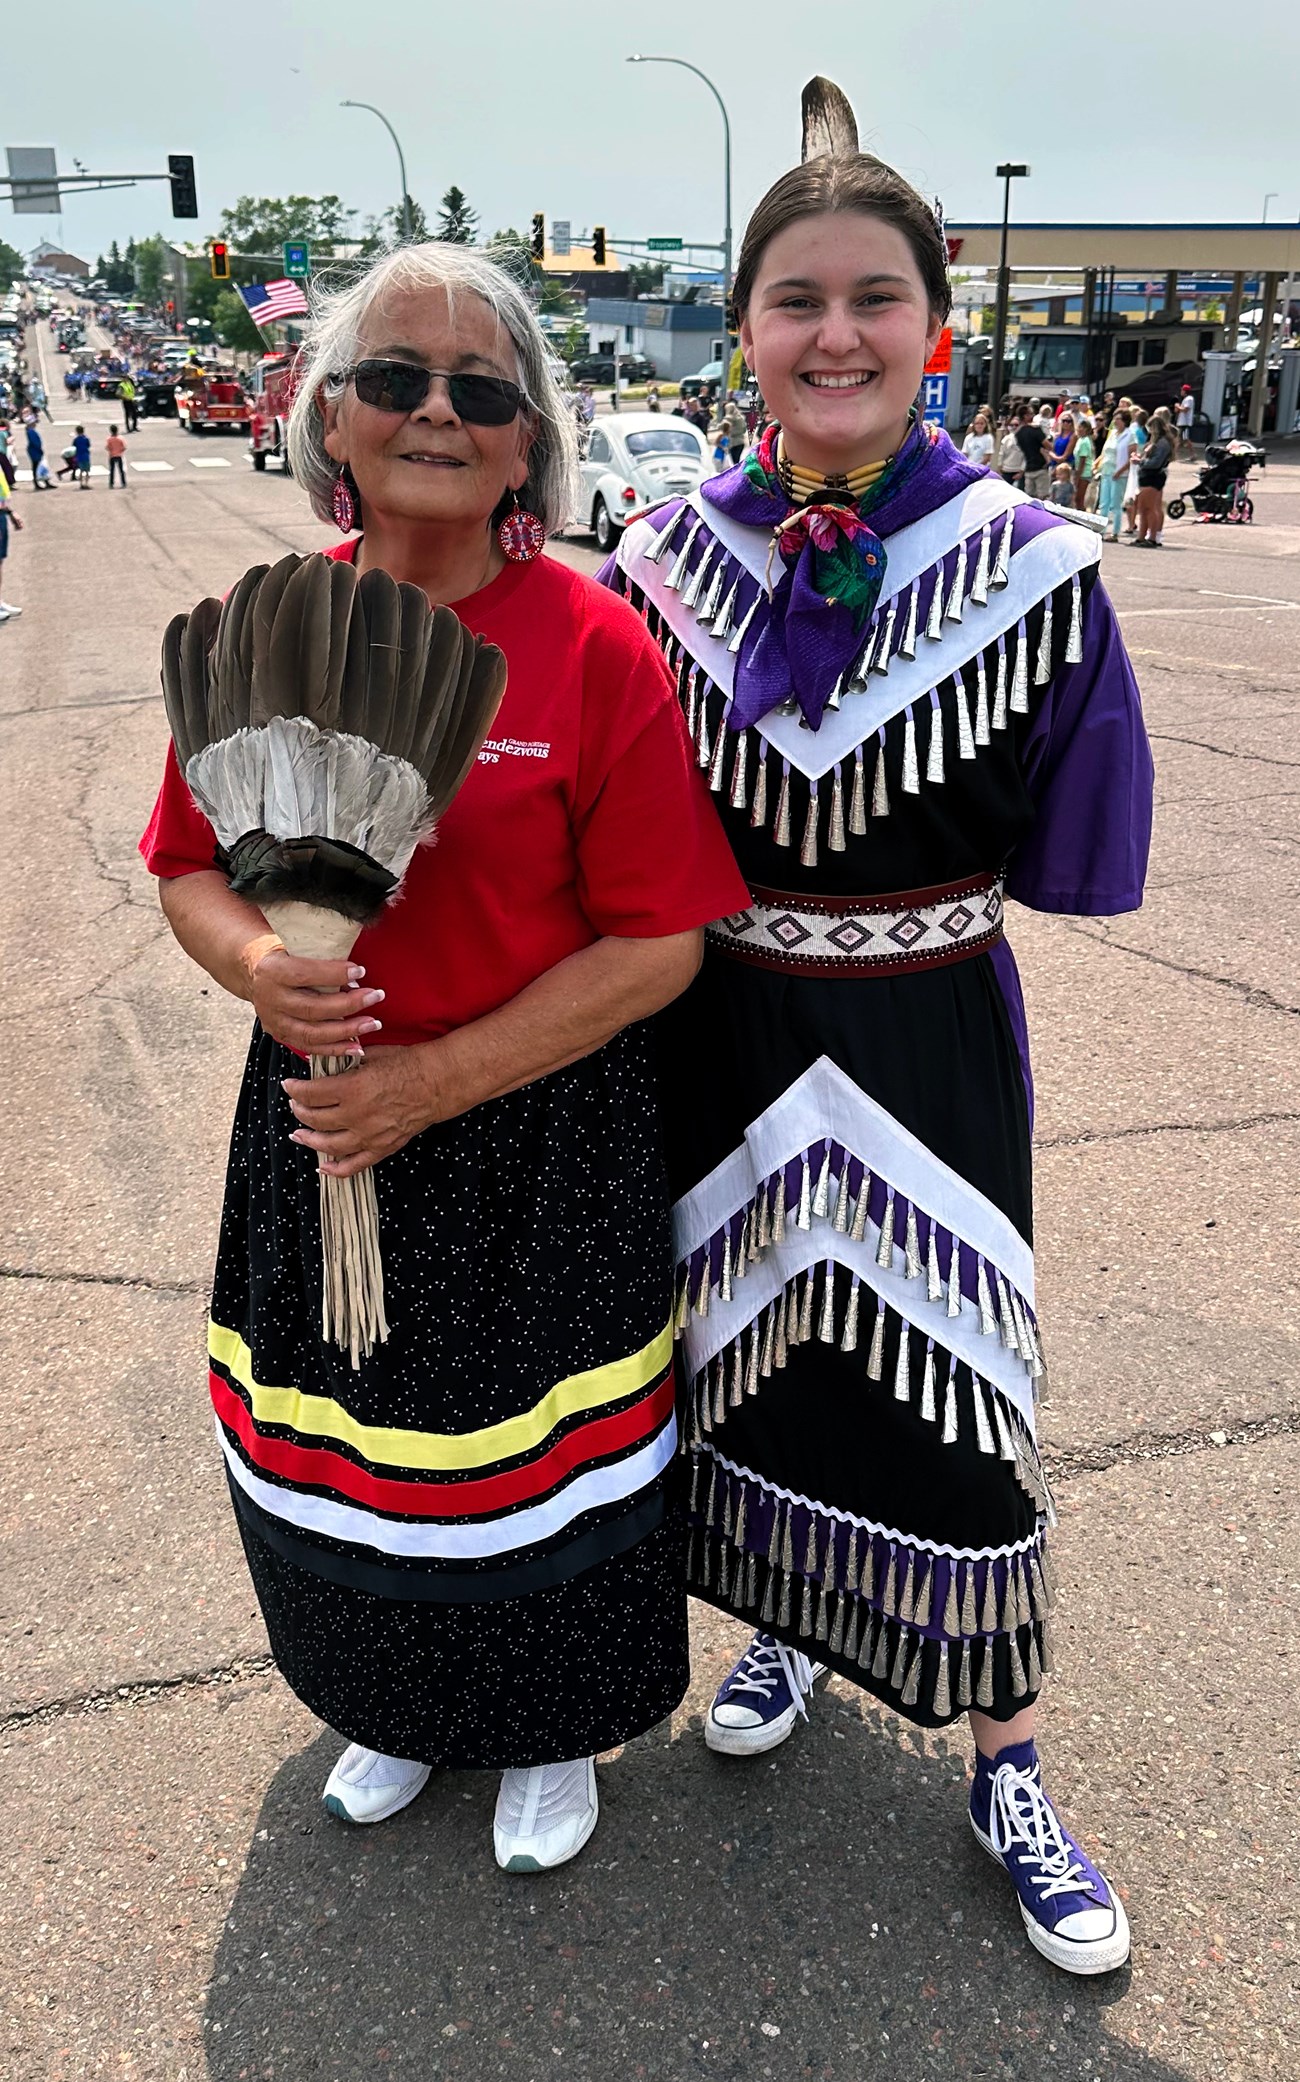 Two people wearing traditional Ojibwe clothing